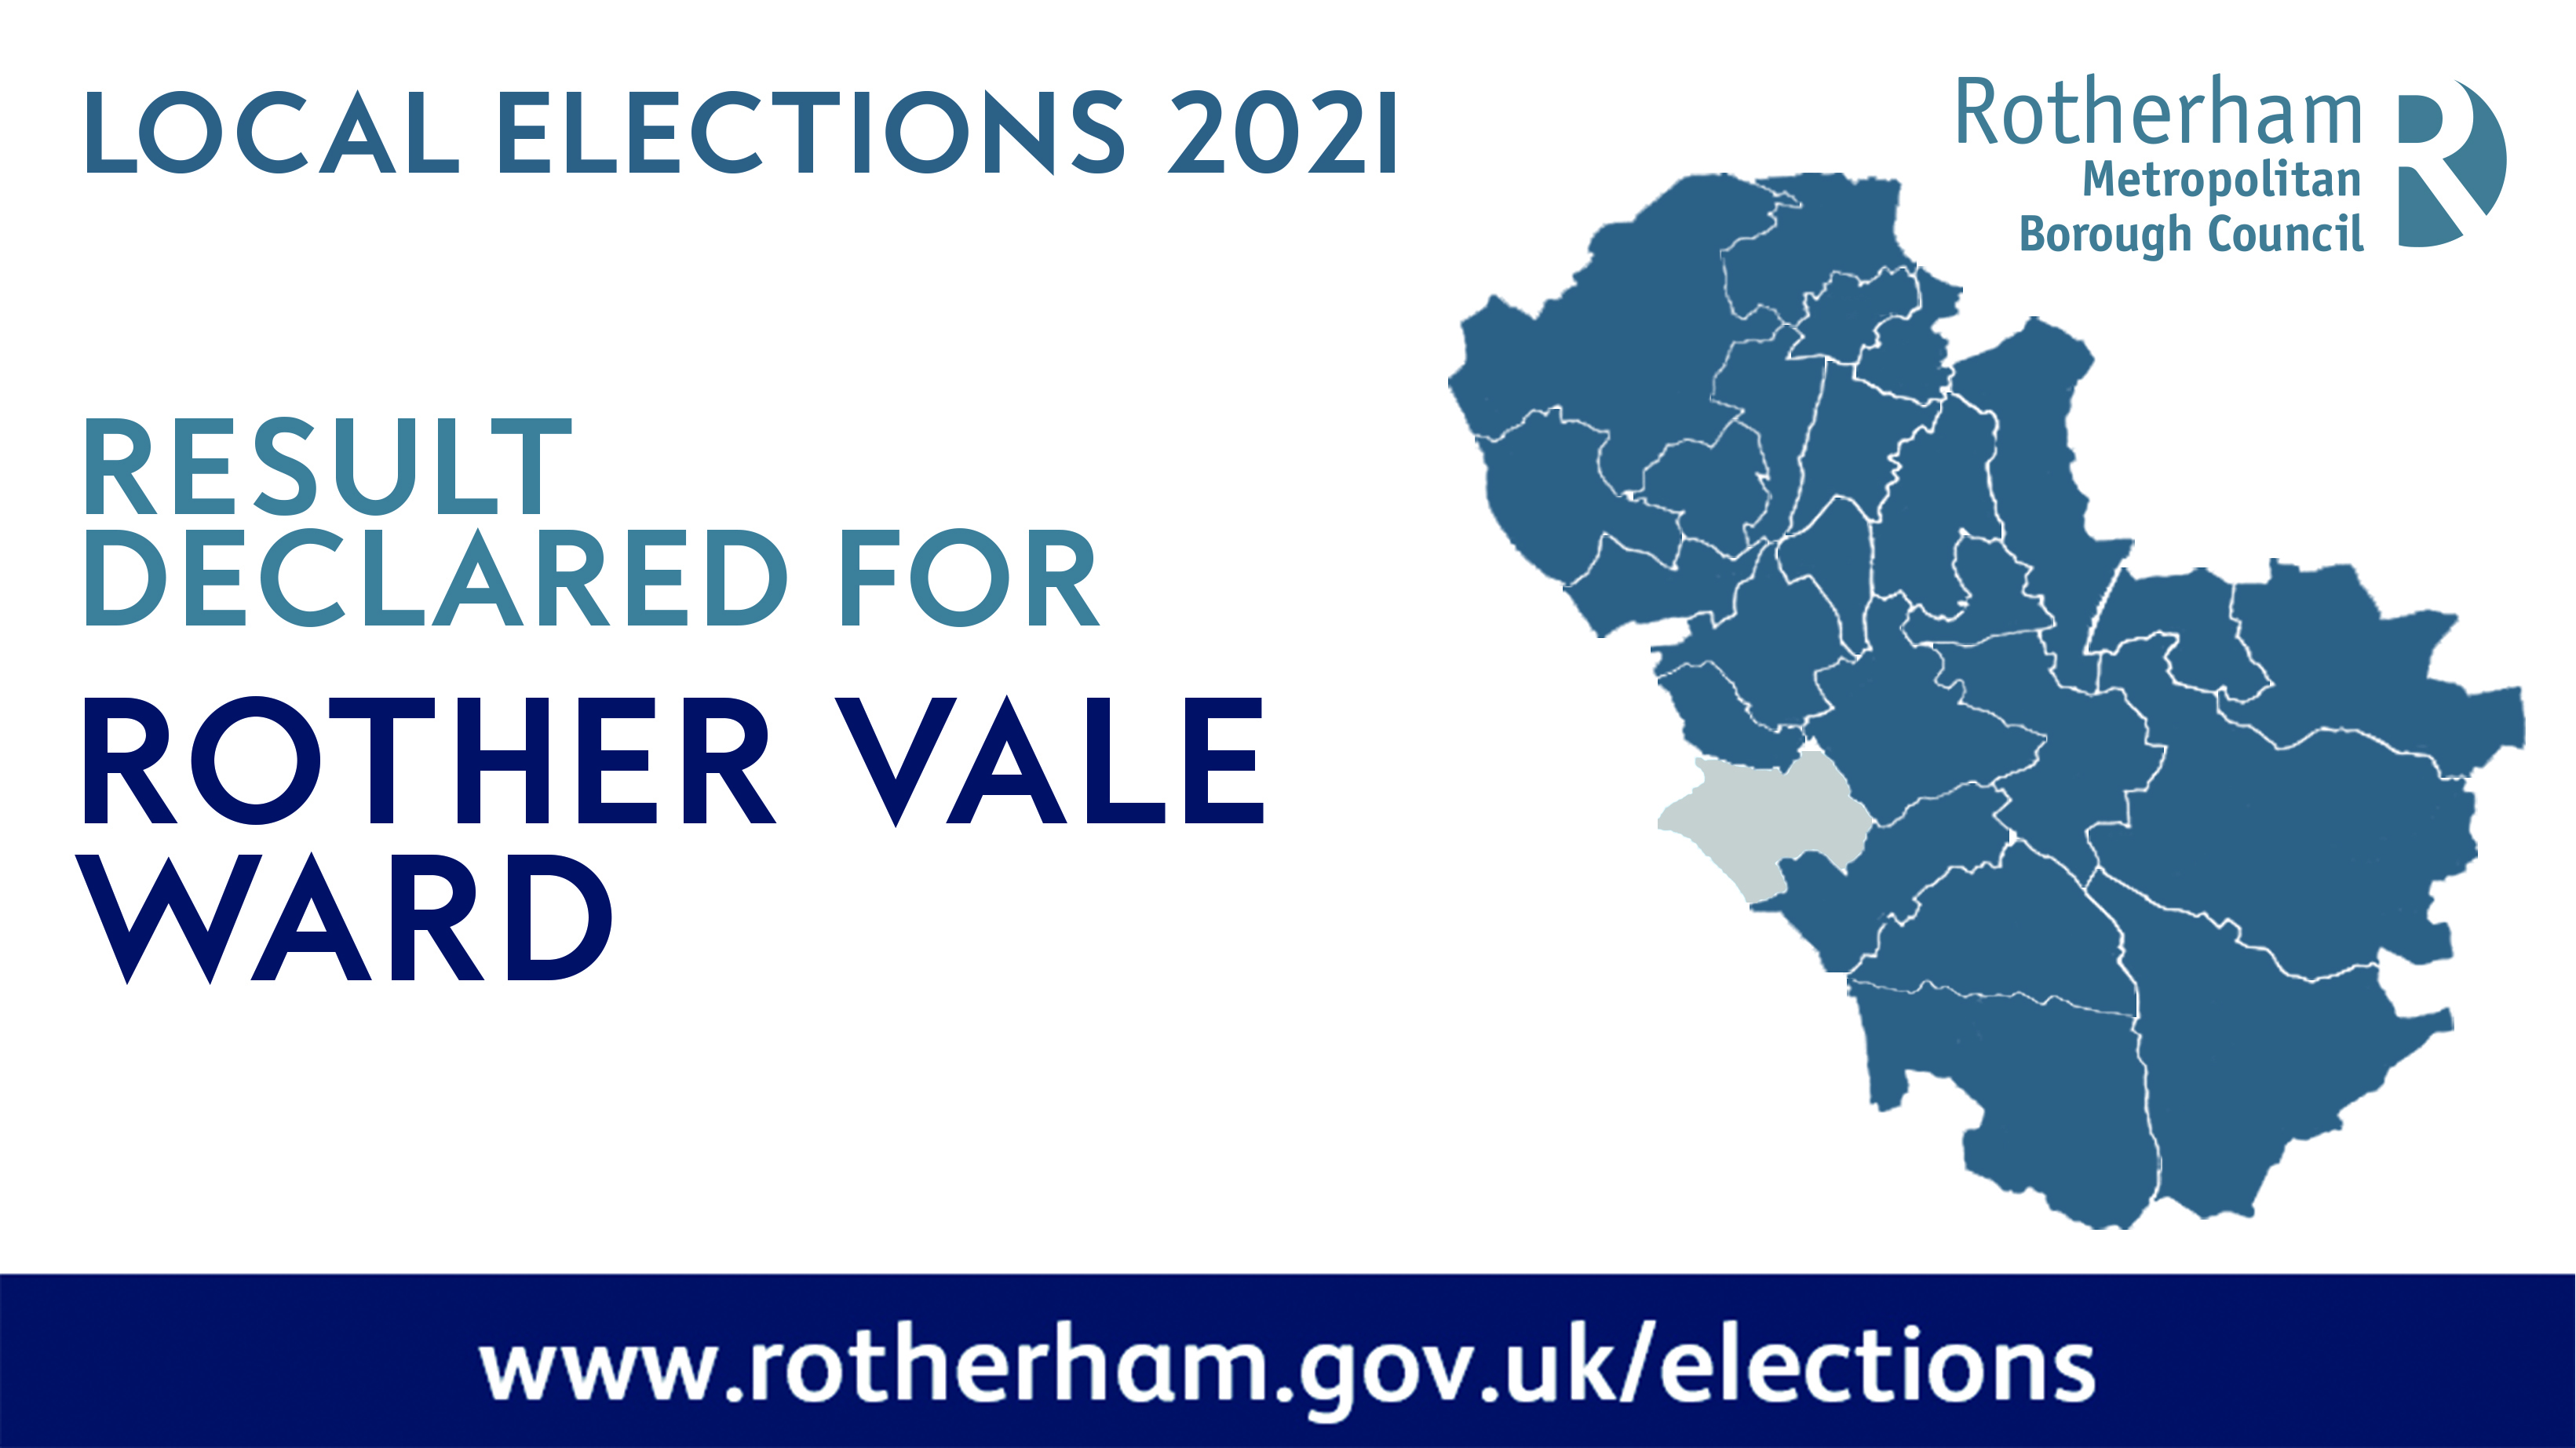 Proposed polling districts and polling places for Rother vale